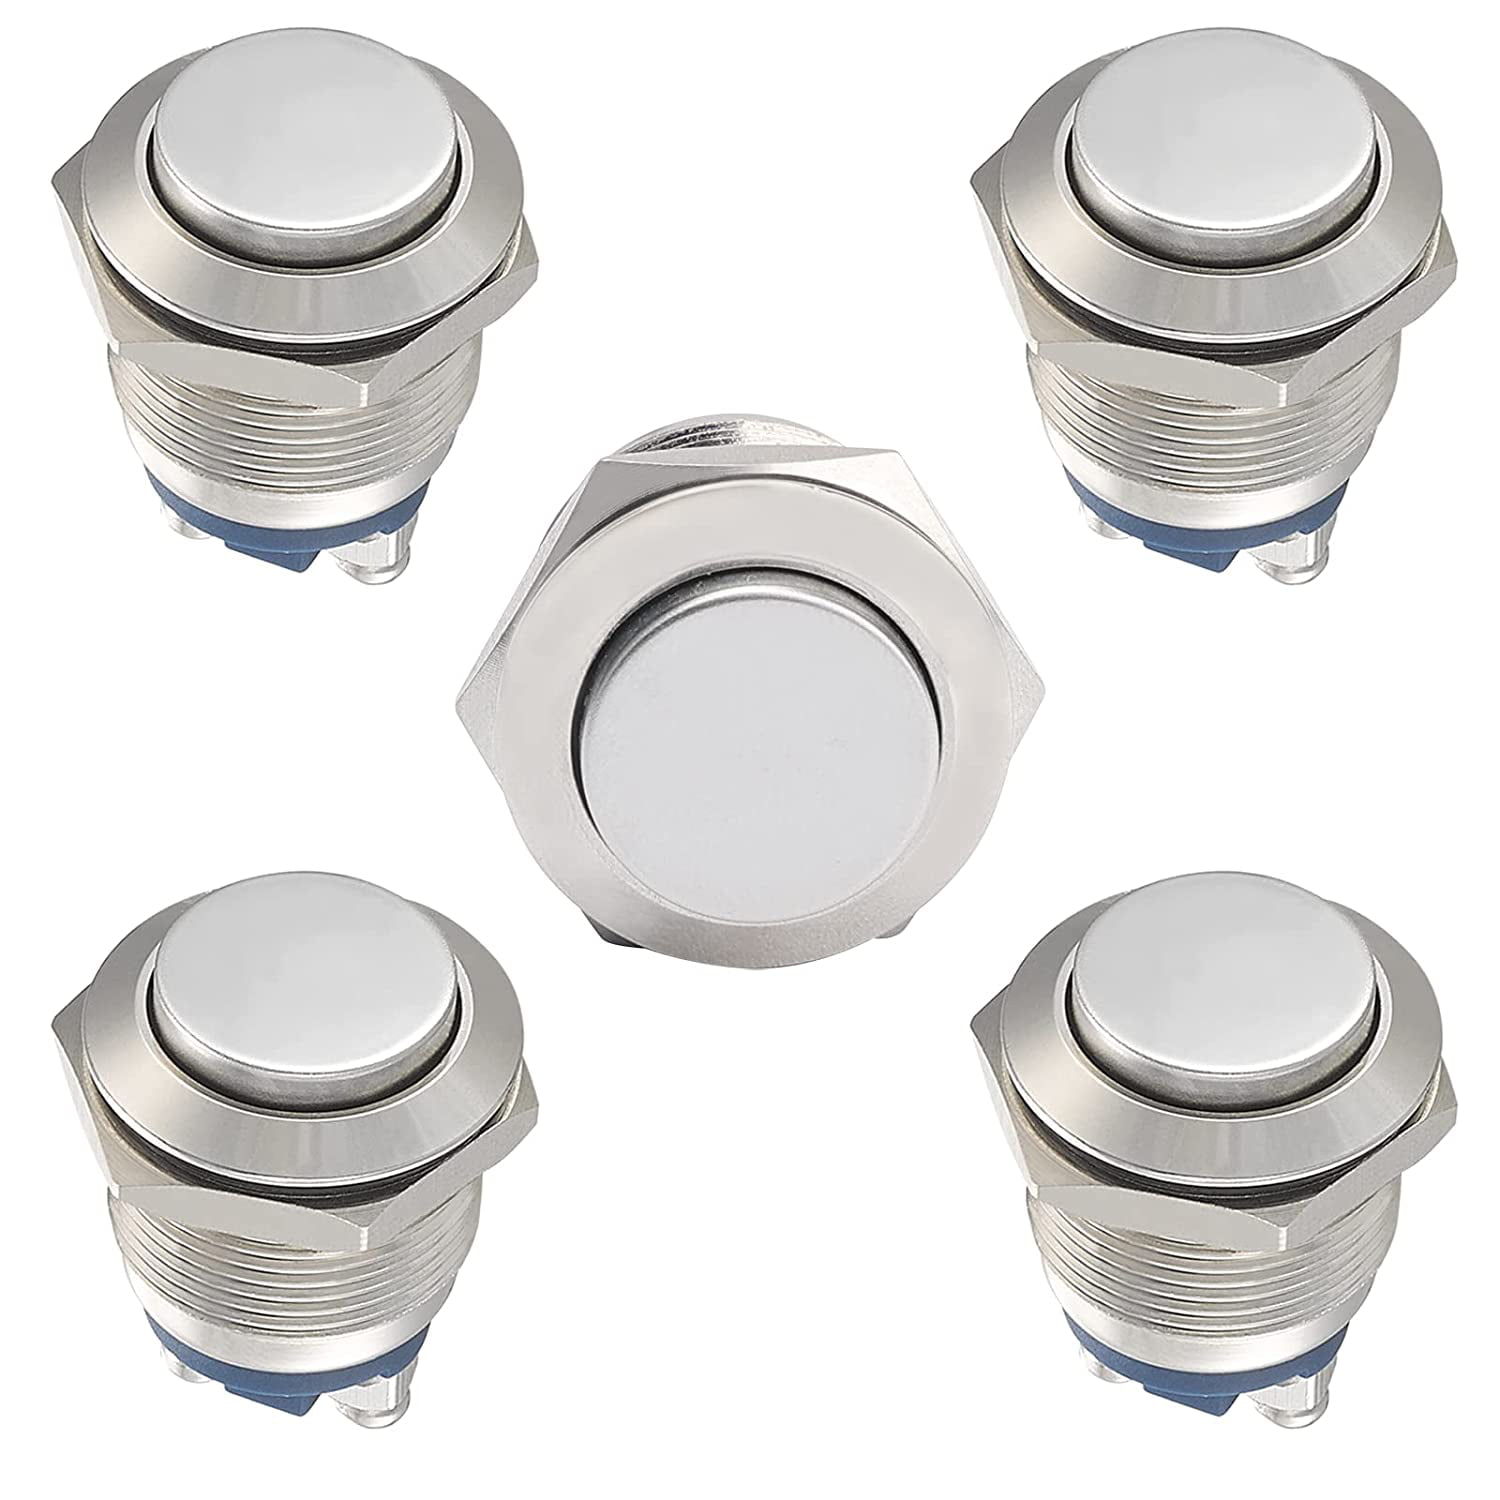 IP65 Waterproof Push Button Switch,Stainless Steel 1 Normally Open Without LED. Starelo 5pcs 12mm Momentary Push Button Switch Silver Shell with pre-Wiring